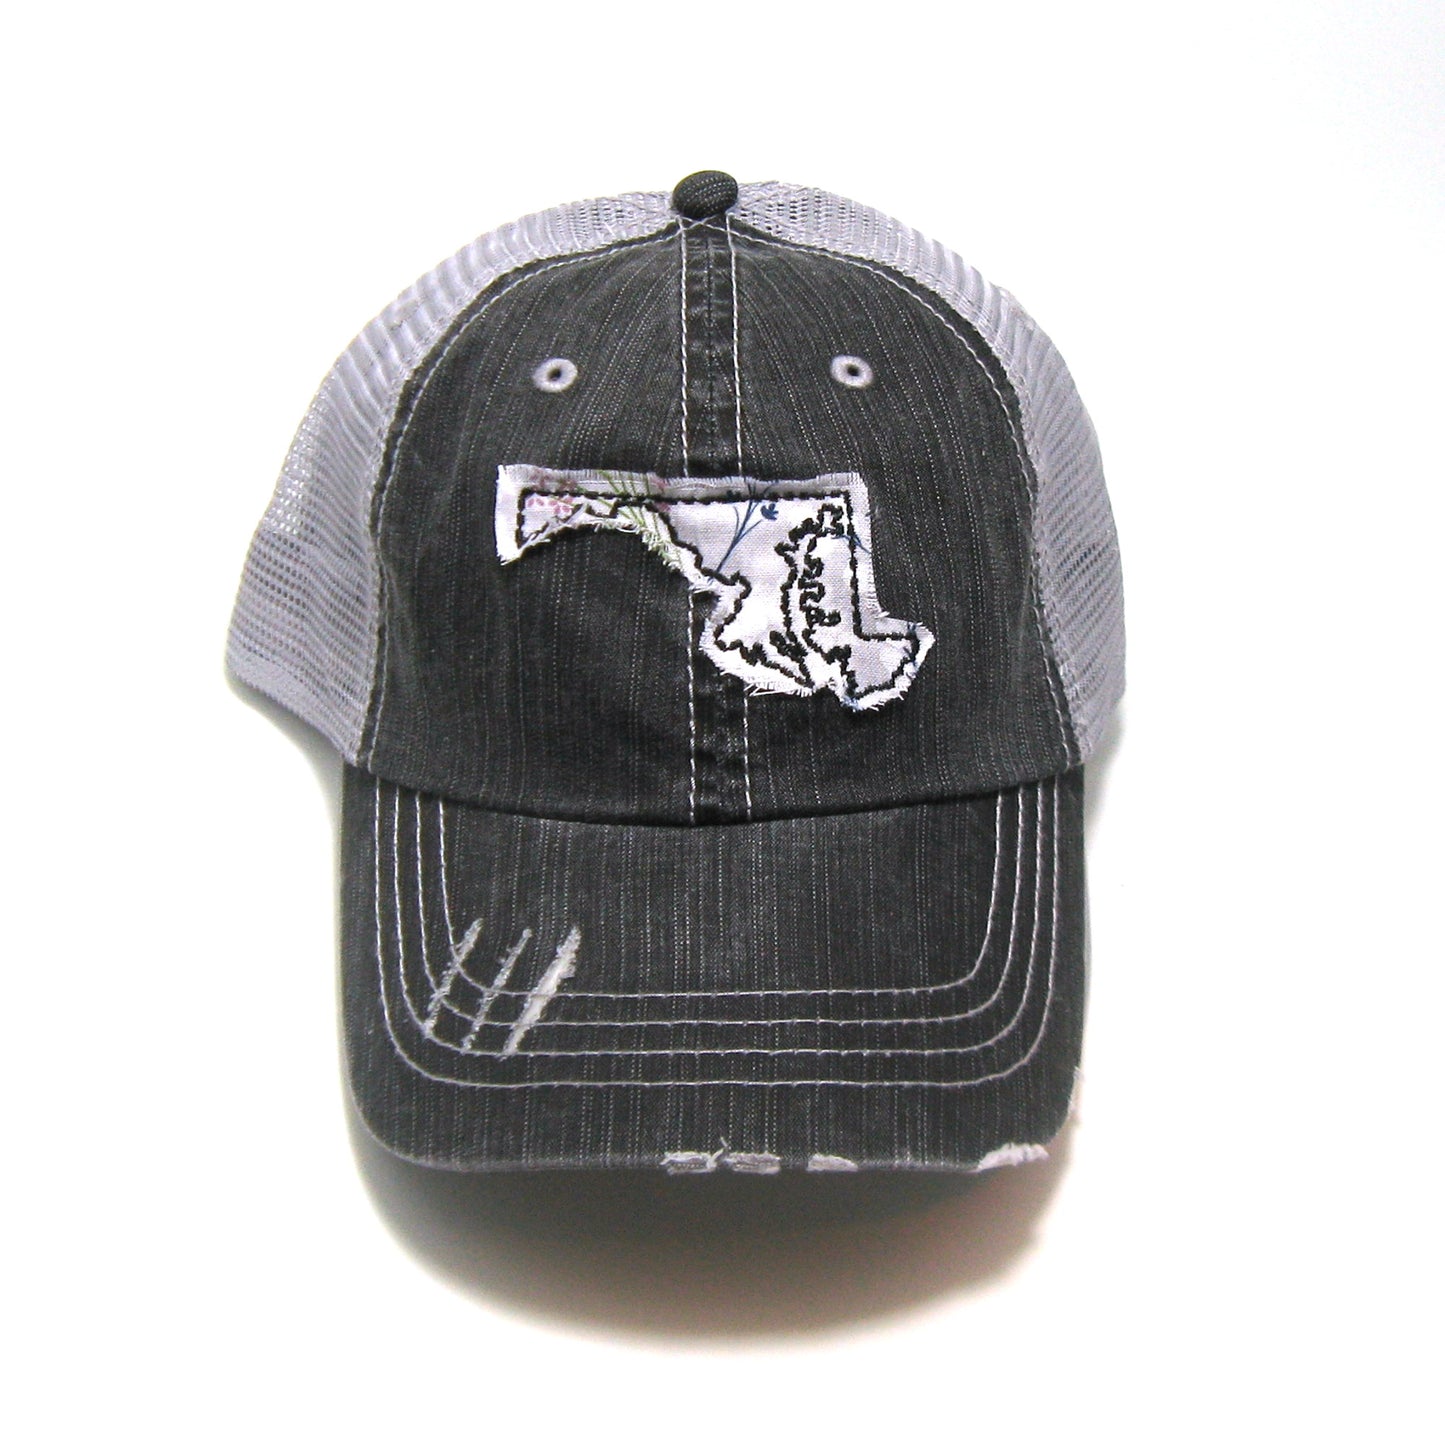 gray distressed trucker hat with gray floral fabric state of Maryland